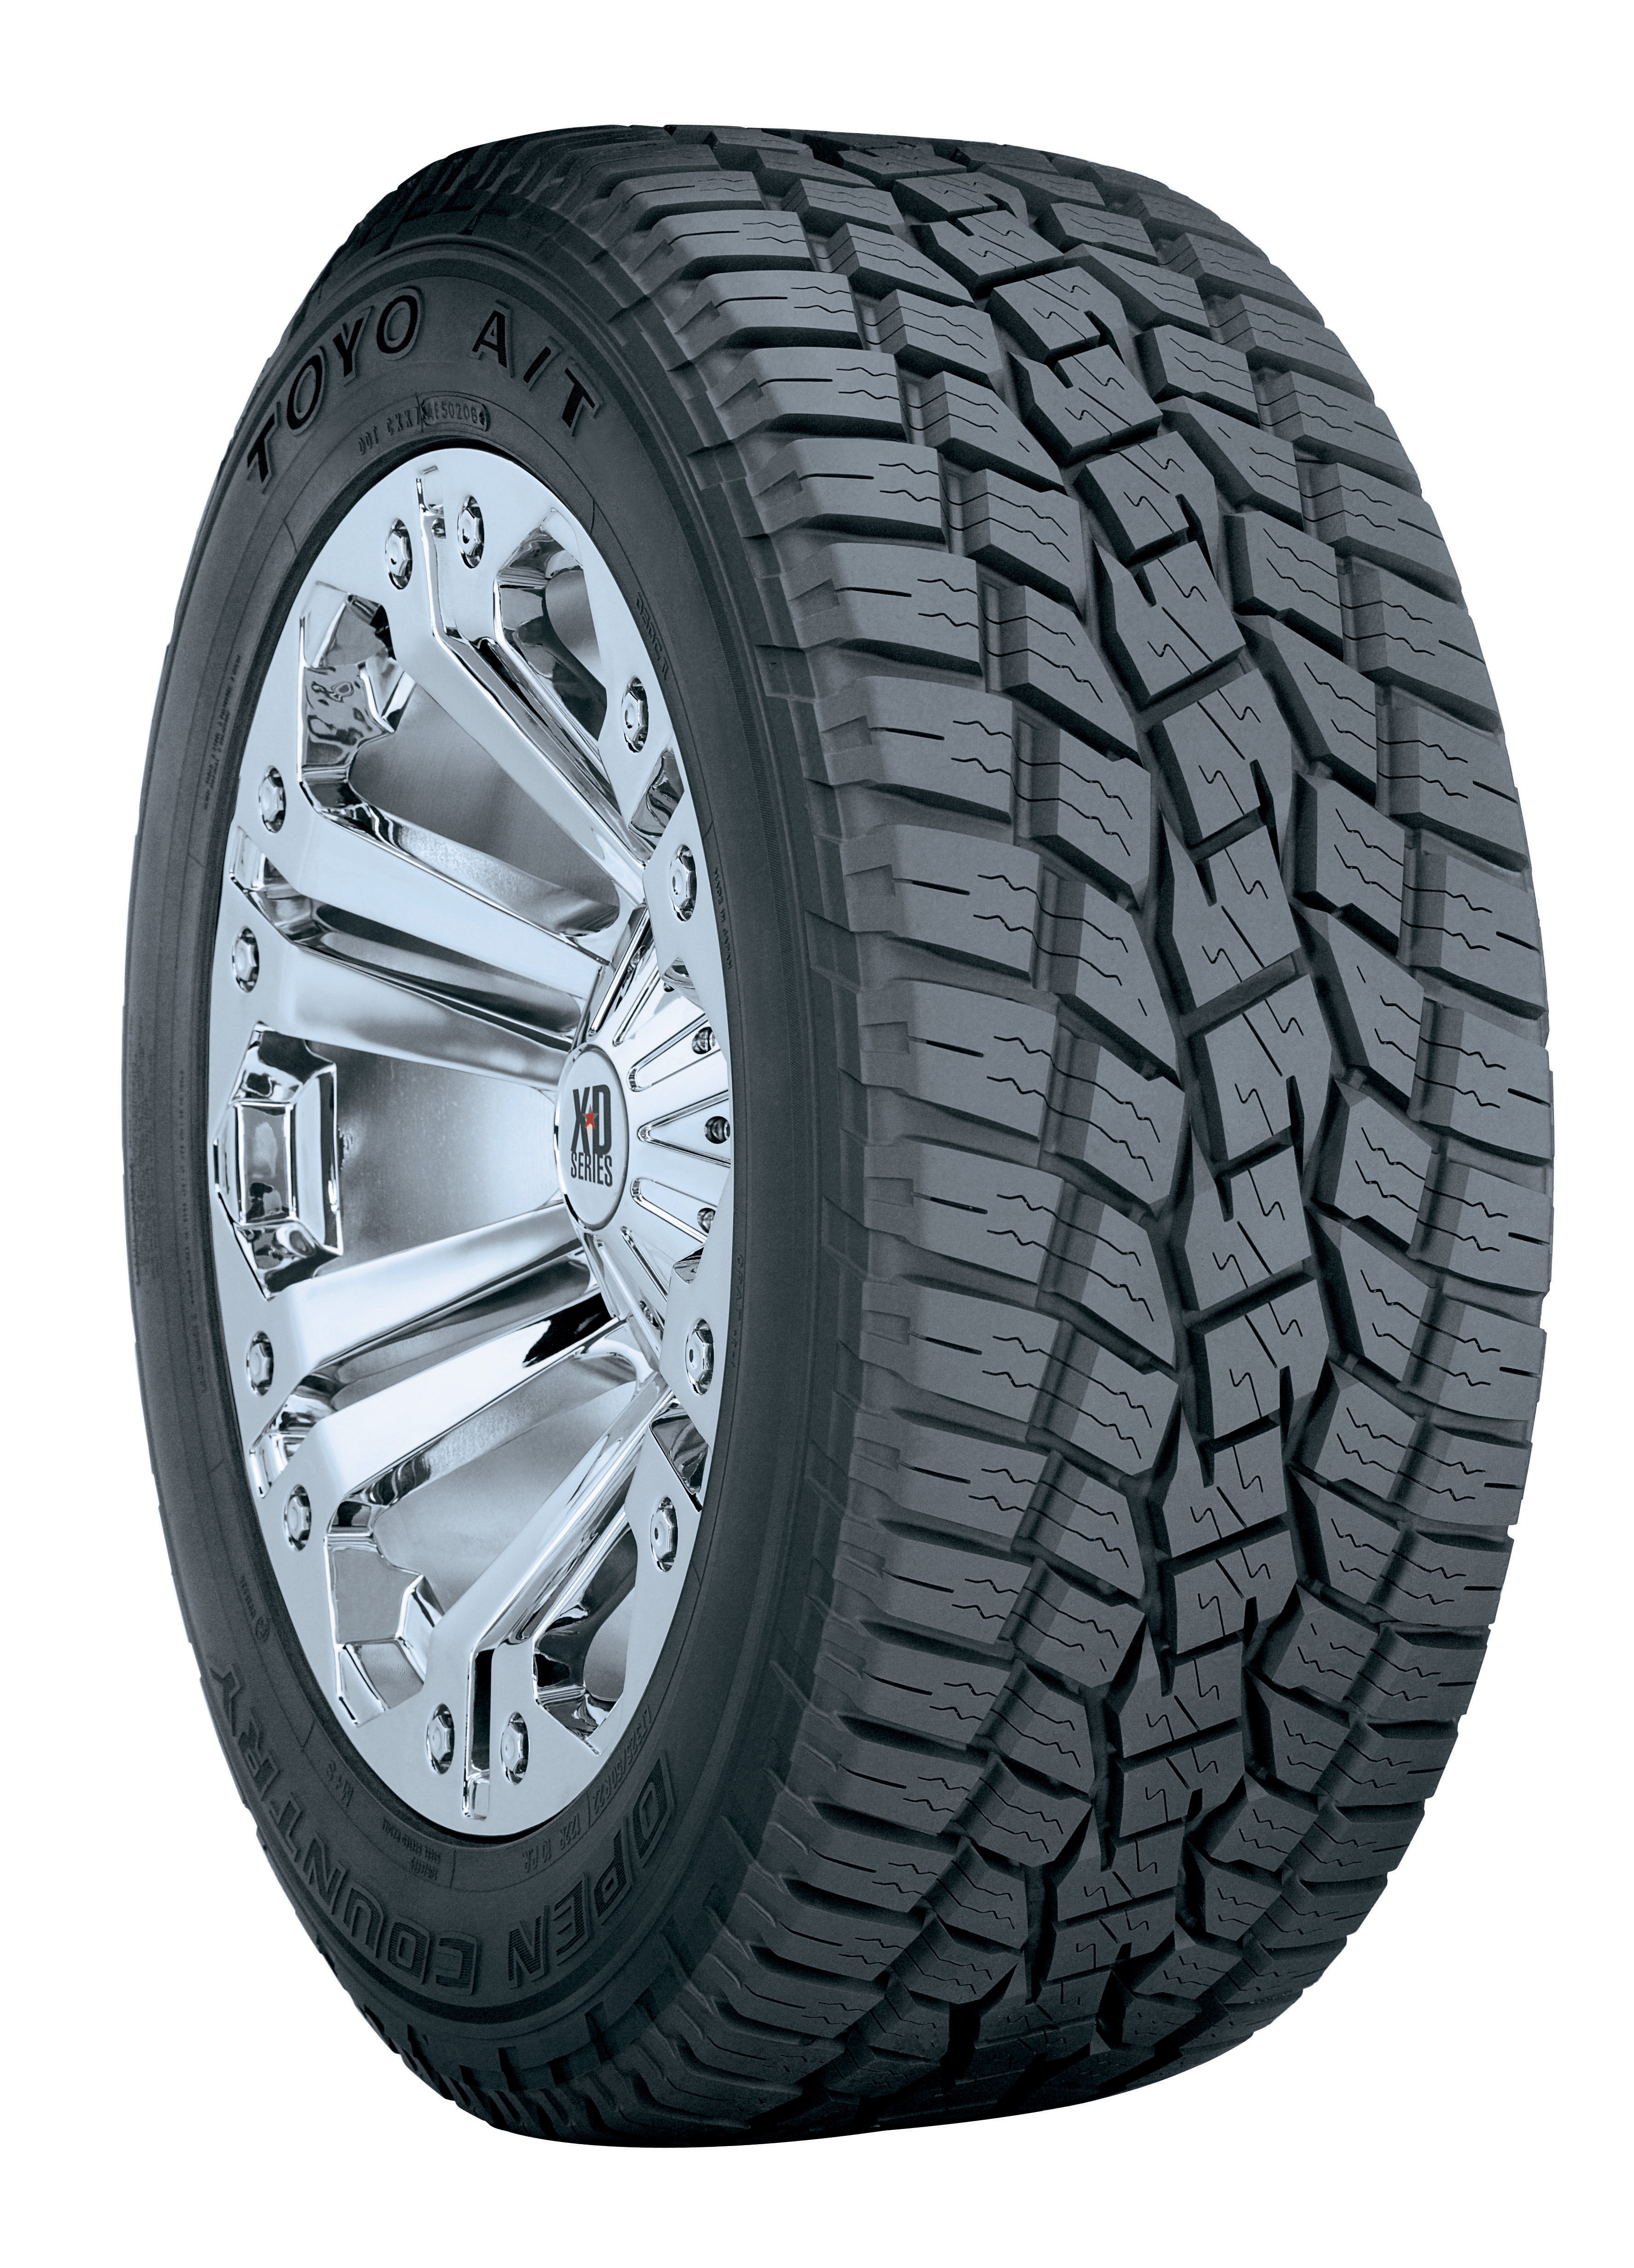 Download this Tire Images Suv Tires picture